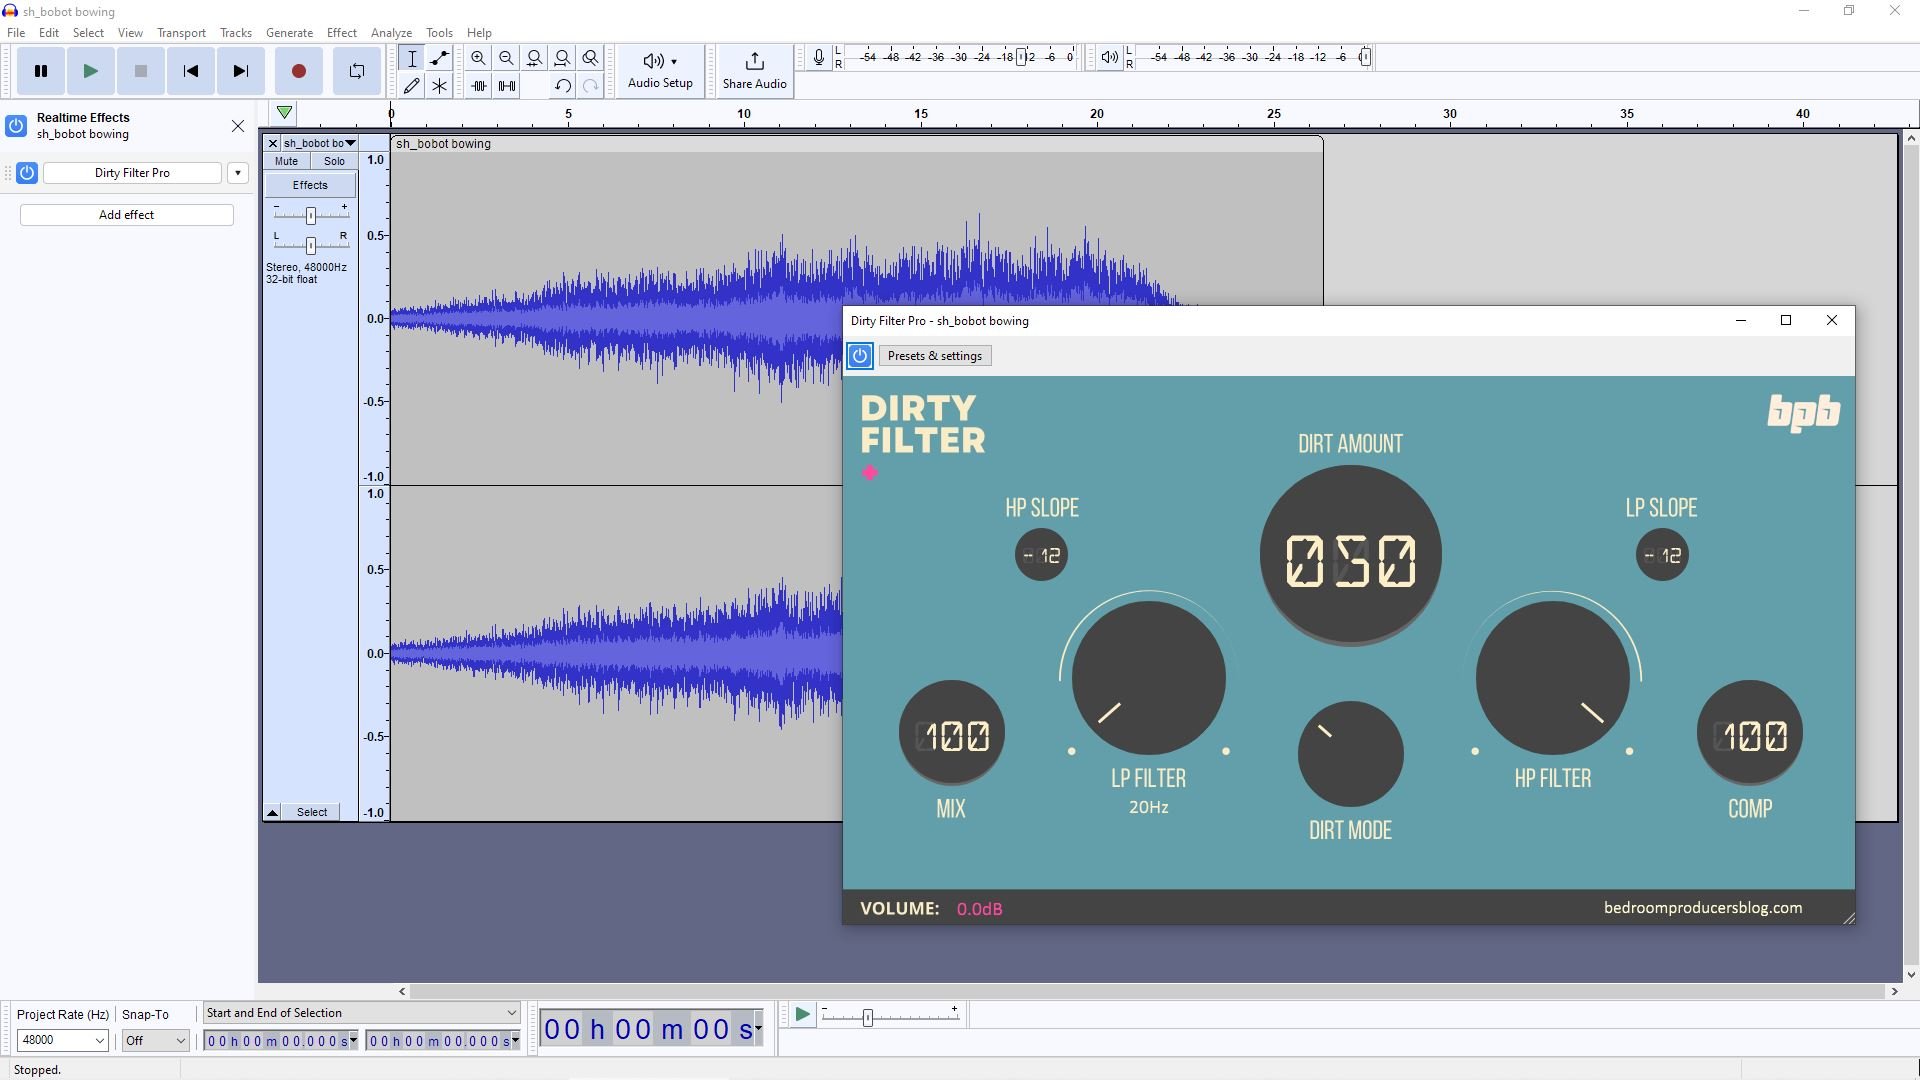 Audacity 3.2 Gets One Step Closer To Being A DAW - Bedroom Producers Blog